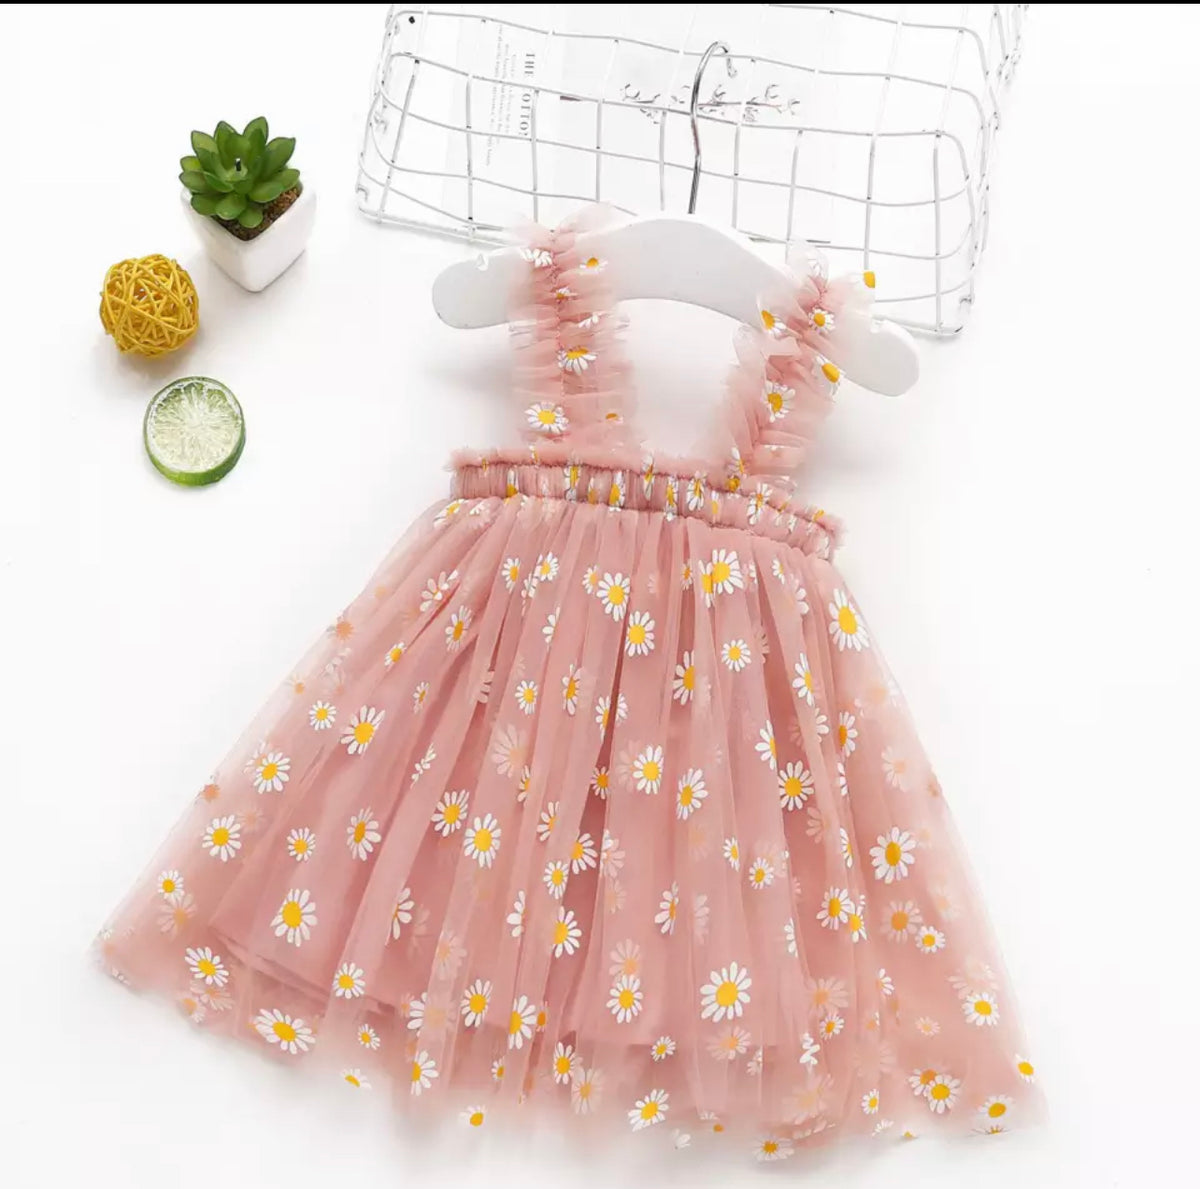 Tulle Dreams Dress in Daisy Pink